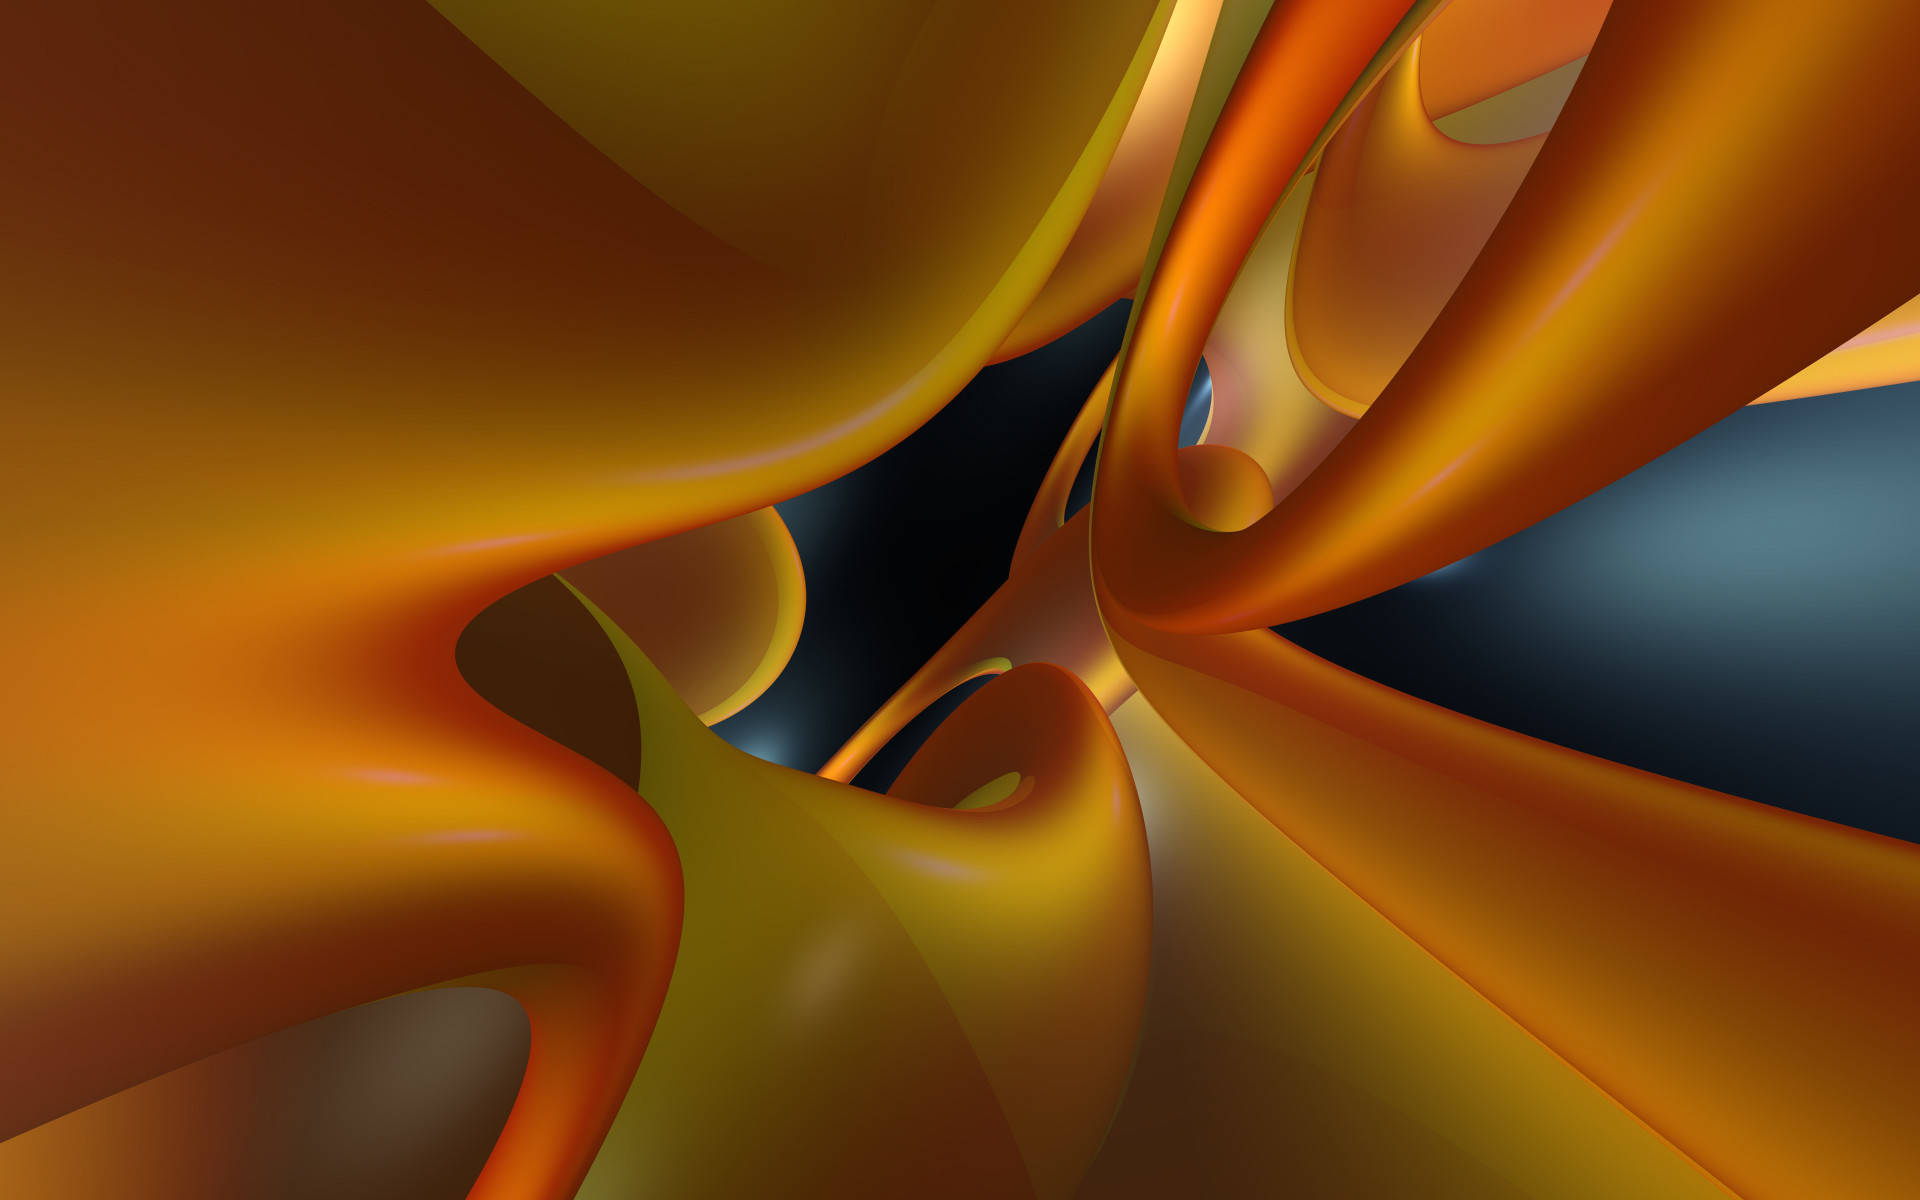 Abstract Hd Design Orange And Yellow Background